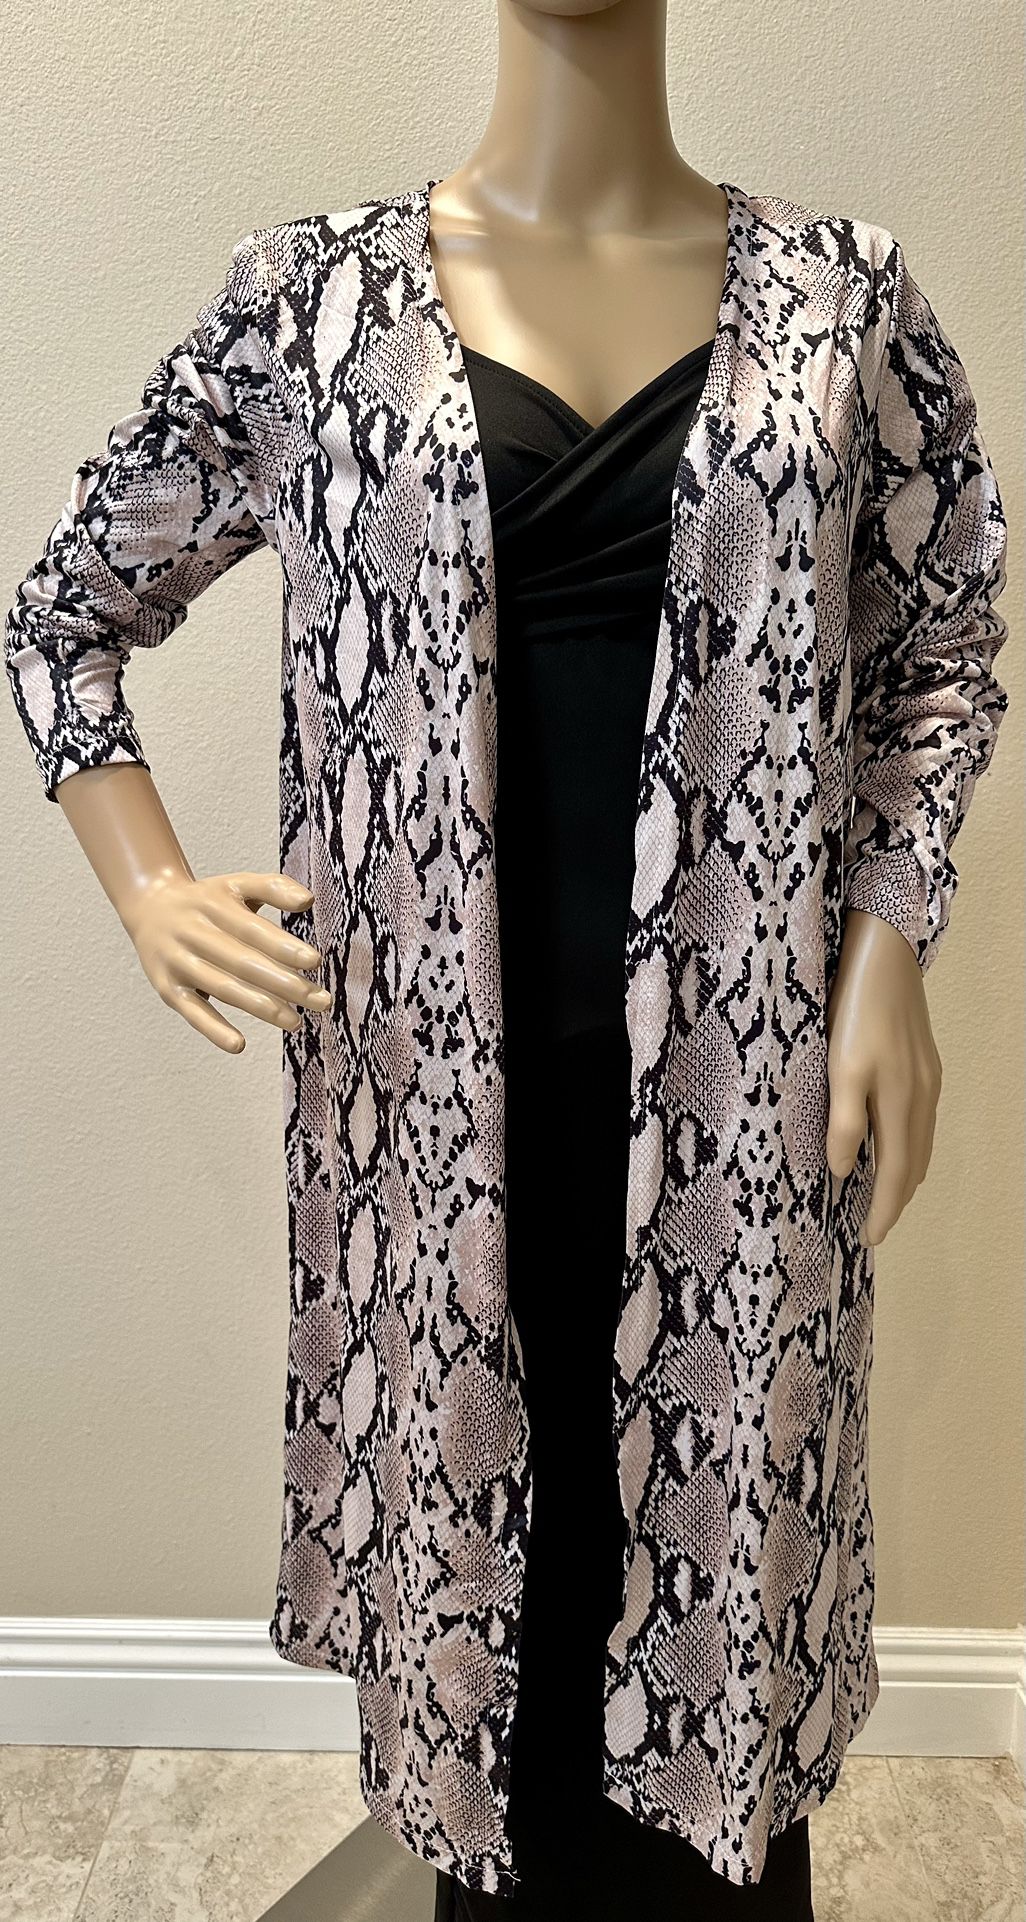 Snake Print Long Sleeve Cover Up Beach Dress Open Front Long Cardigan Size 6